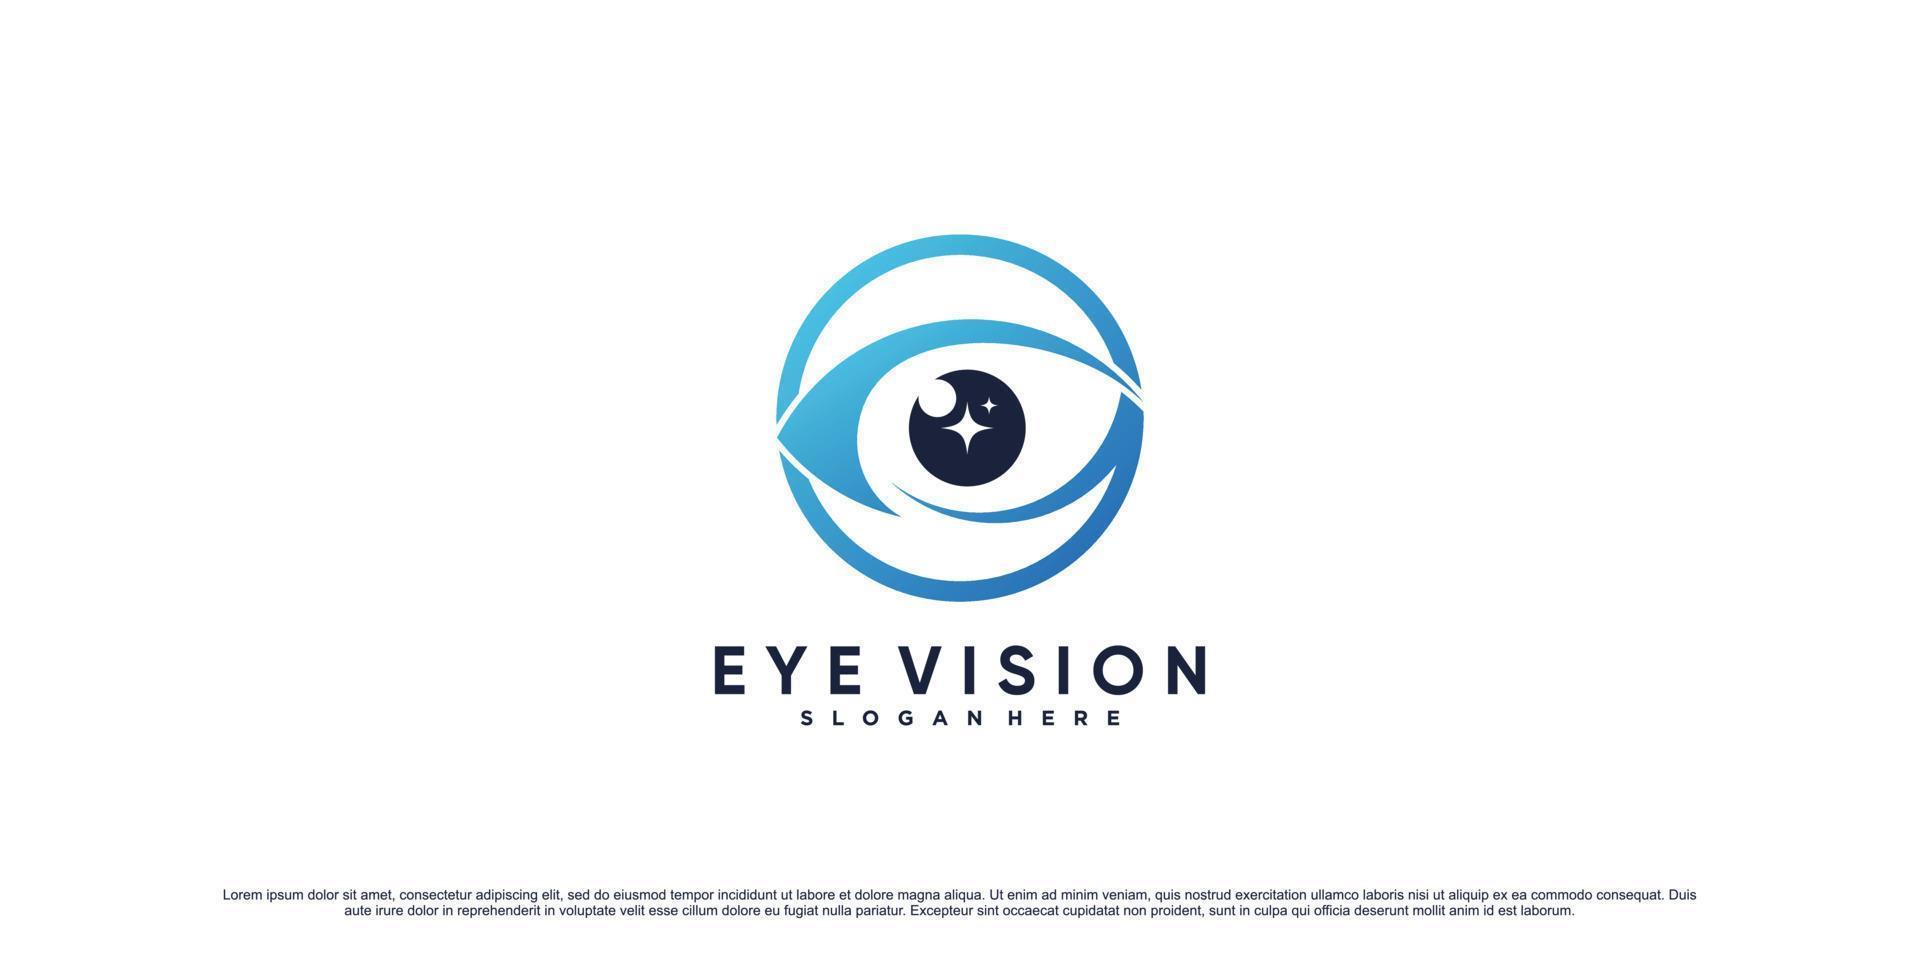 Eye vision logo design template with circle concept and creative element Premium Vector